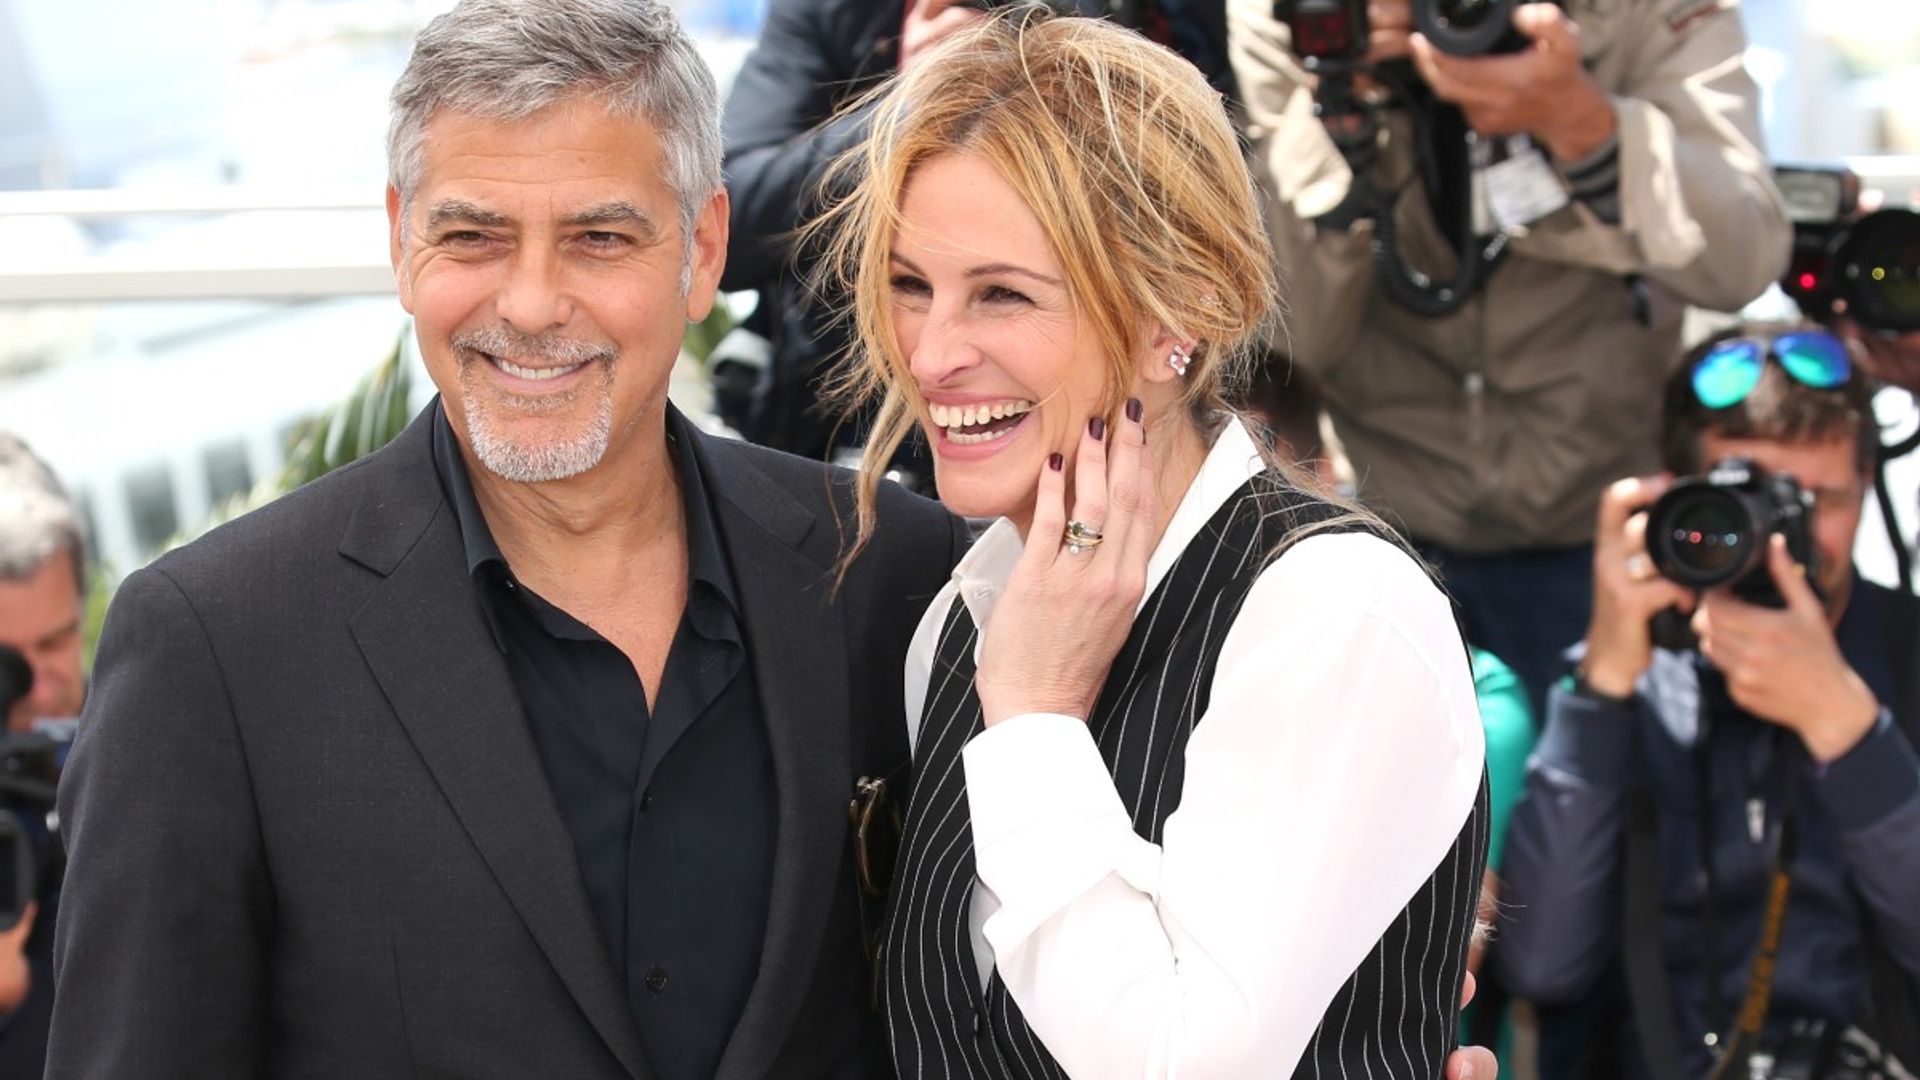 Julia Roberts causes a stir as she reunites with Clooney in new